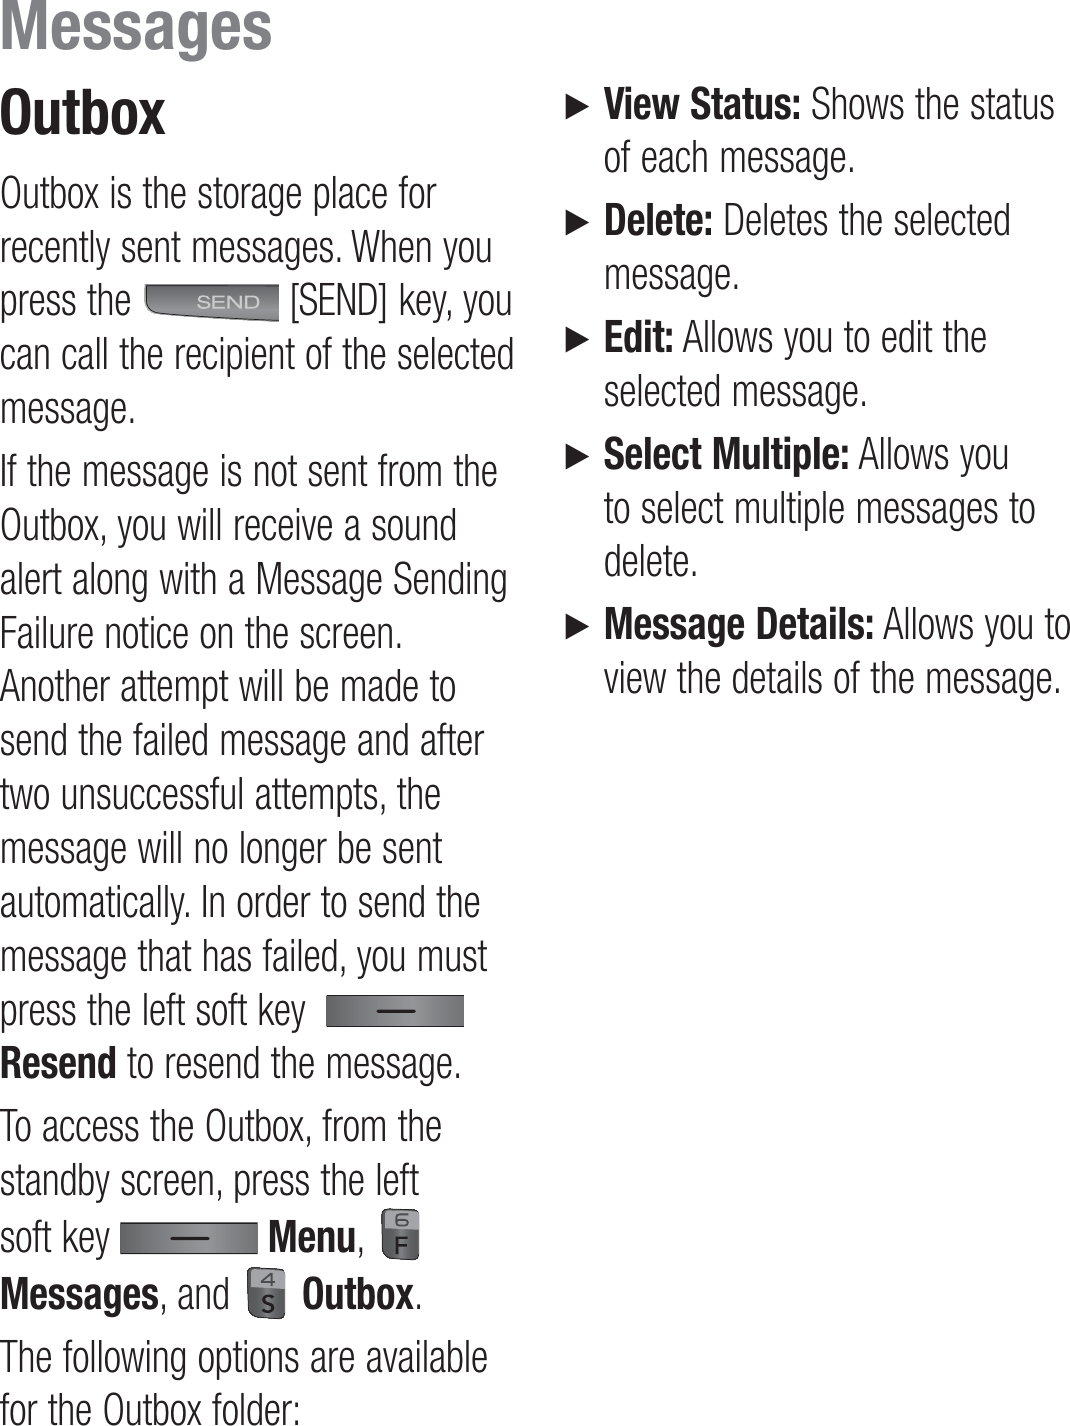 OutboxOutbox is the storage place for recently sent messages. When you press the   [SEND] key, you can call the recipient of the selected message.If the message is not sent from the Outbox, you will receive a sound alert along with a Message Sending Failure notice on the screen. Another attempt will be made to send the failed message and after two unsuccessful attempts, the message will no longer be sent automatically. In order to send the message that has failed, you must press the left soft key    Resend to resend the message.To access the Outbox, from the standby screen, press the left soft key   Menu,   Messages, and   Outbox.The following options are available for the Outbox folder:►   View Status: Shows the status of each message.►   Delete: Deletes the selected message.►   Edit: Allows you to edit the selected message.►   Select Multiple: Allows you to select multiple messages to delete.►   Message Details: Allows you to view the details of the message.Messages